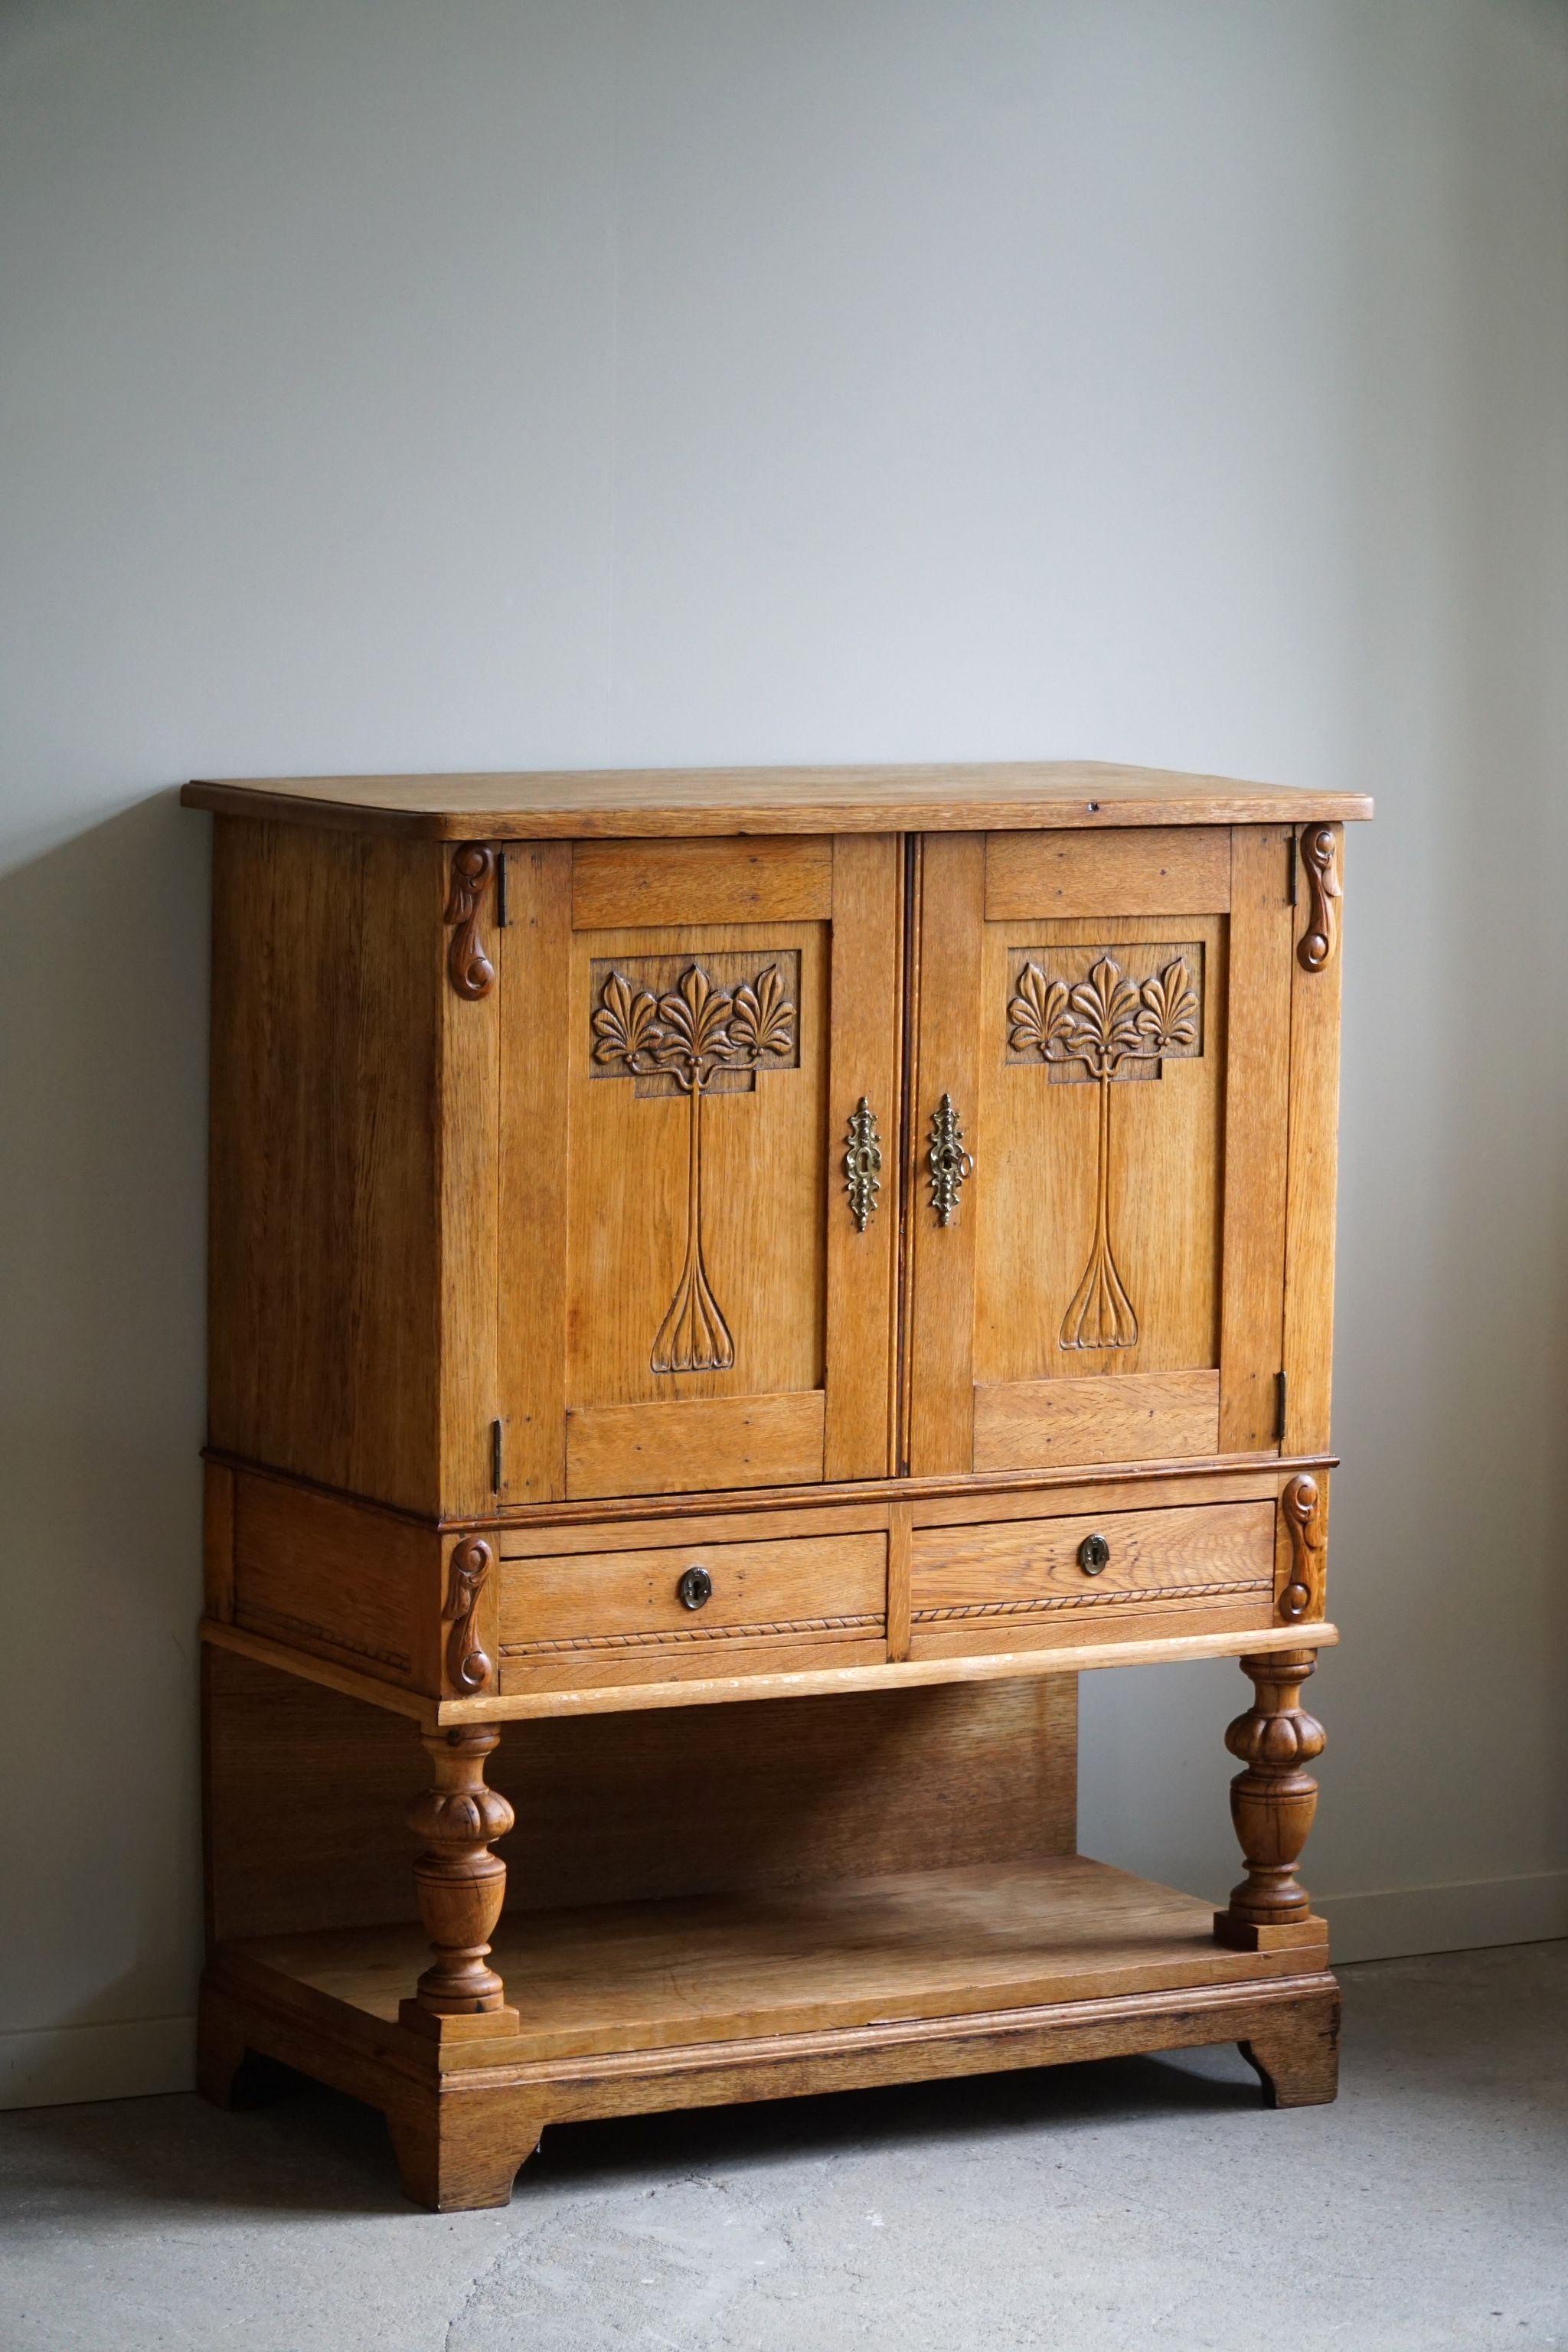 An exquisite handcrafted cabinet in solid oak - a perfect storage furniture for the living room with space for your art and books. Crafted by a skilled Danish cabinetmaker in the 1920s. Constructed from oak wood, known for its durability and